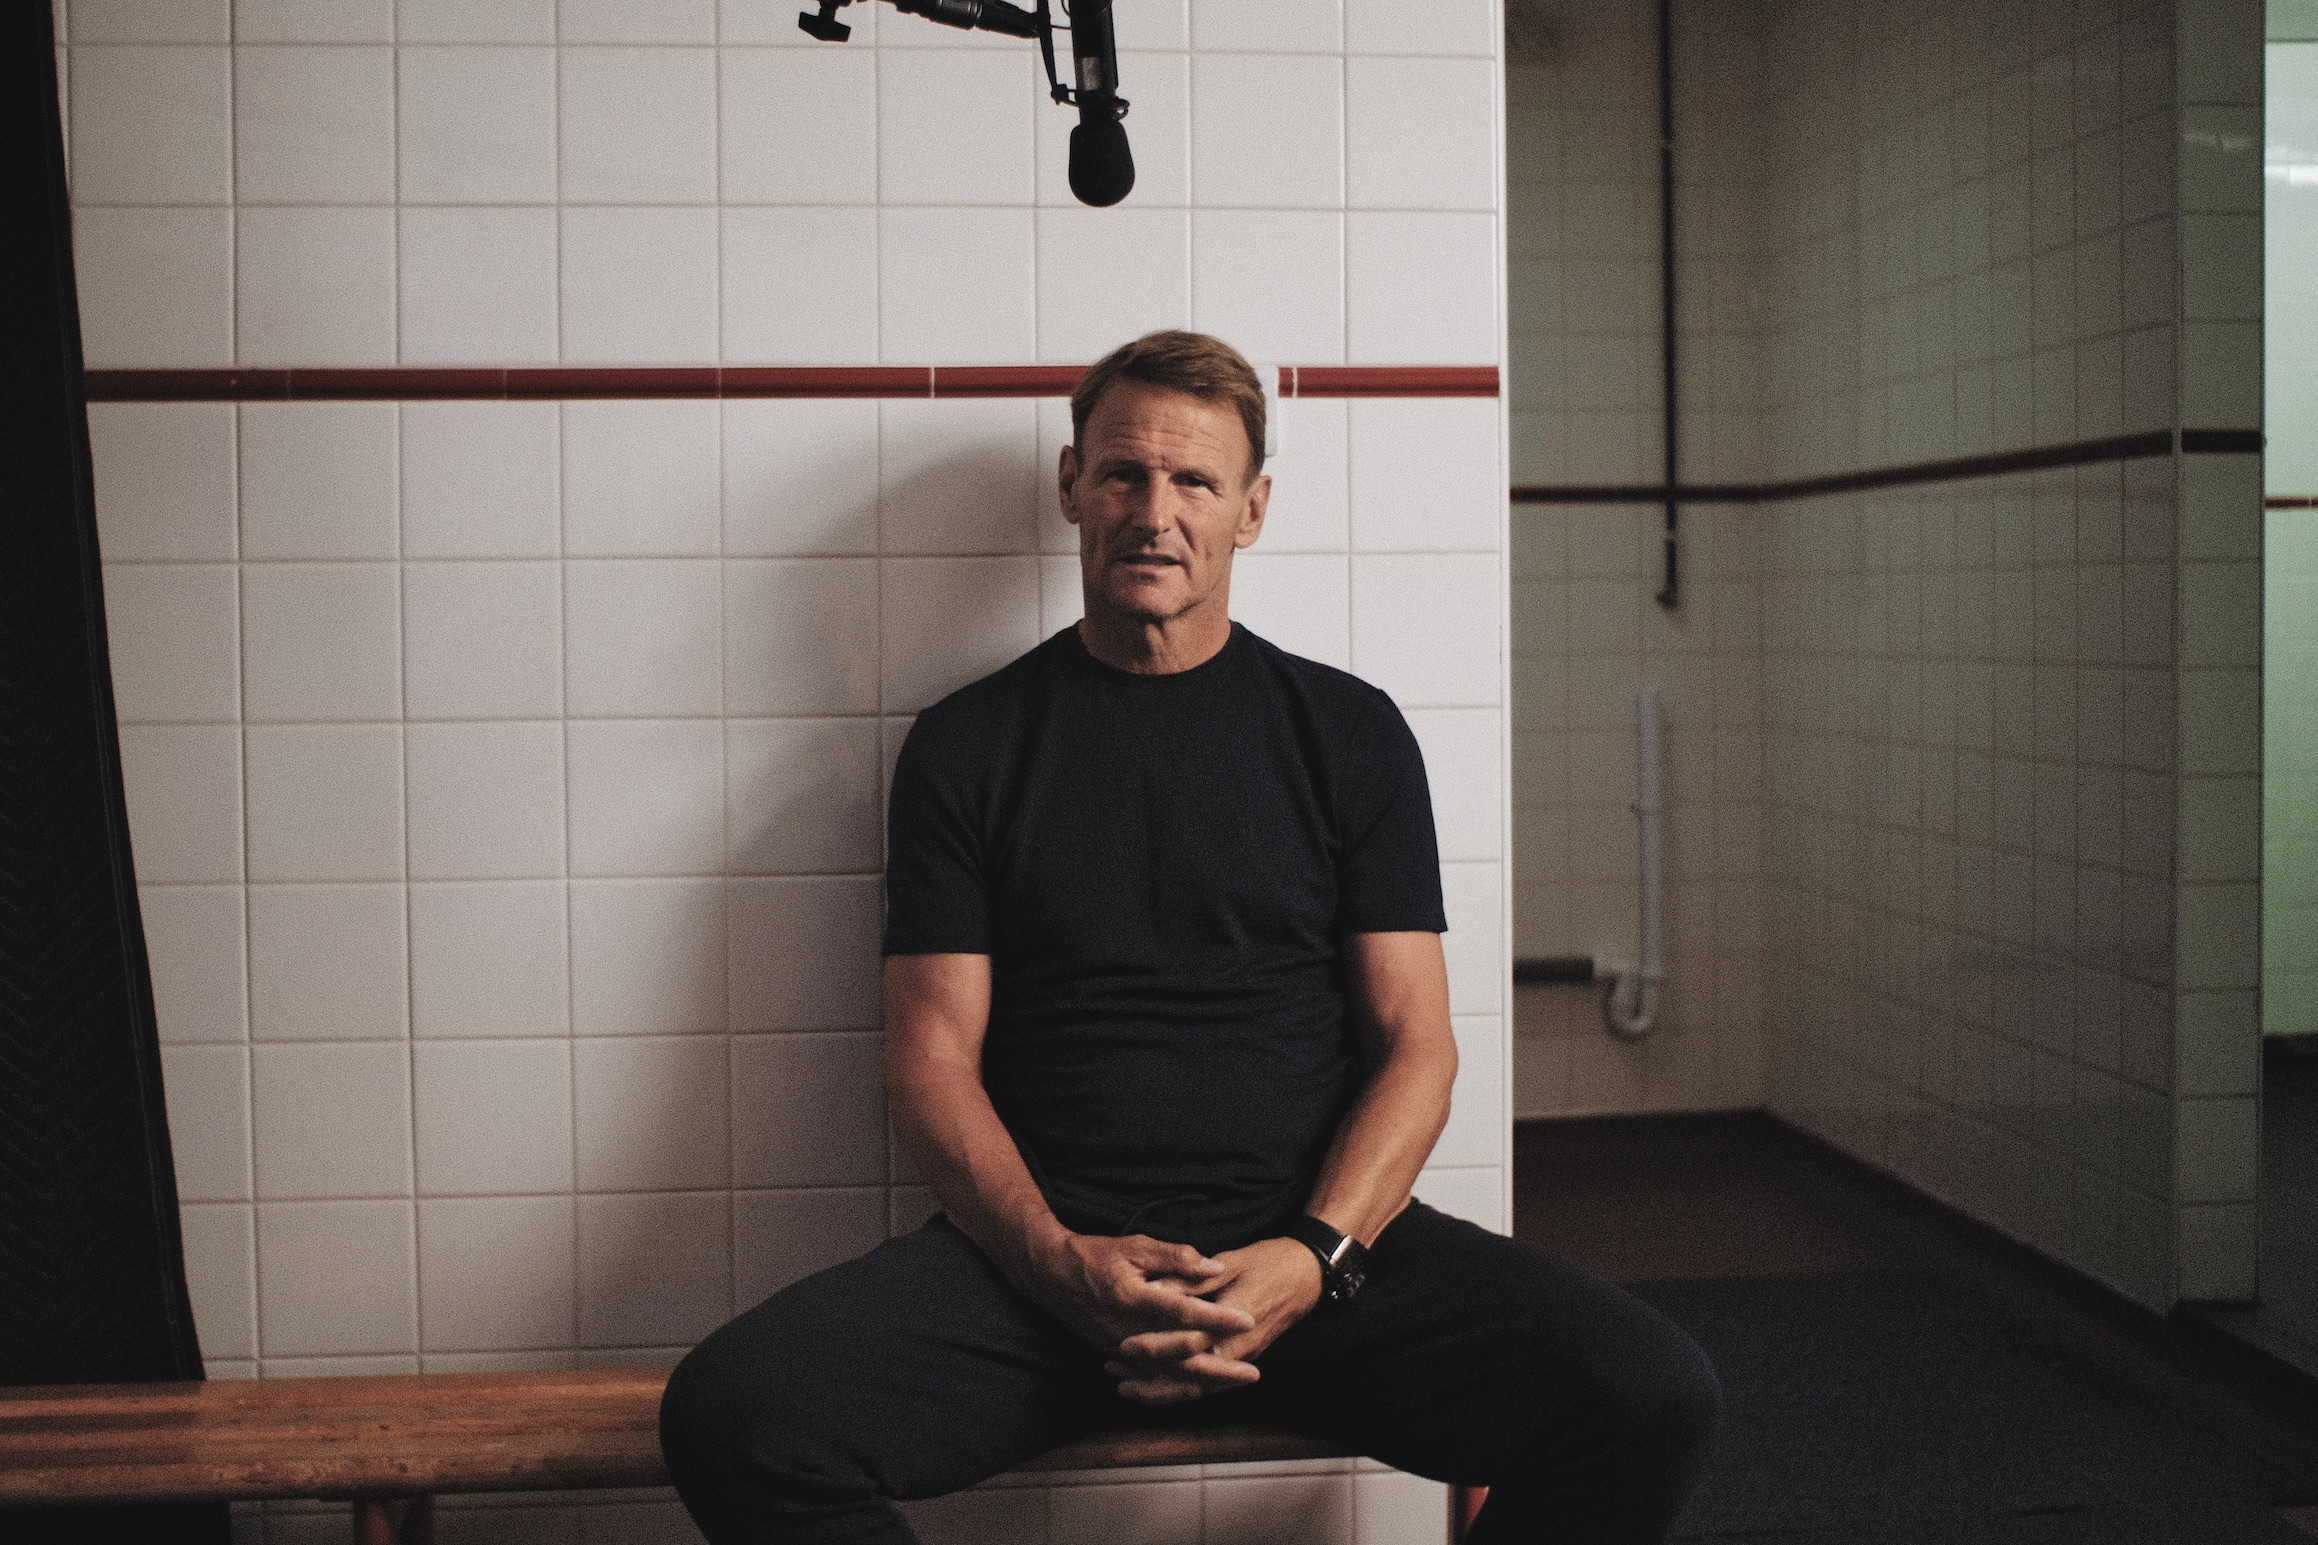 Striker Teddy Sheringham talks about the 1999 season and the treble.